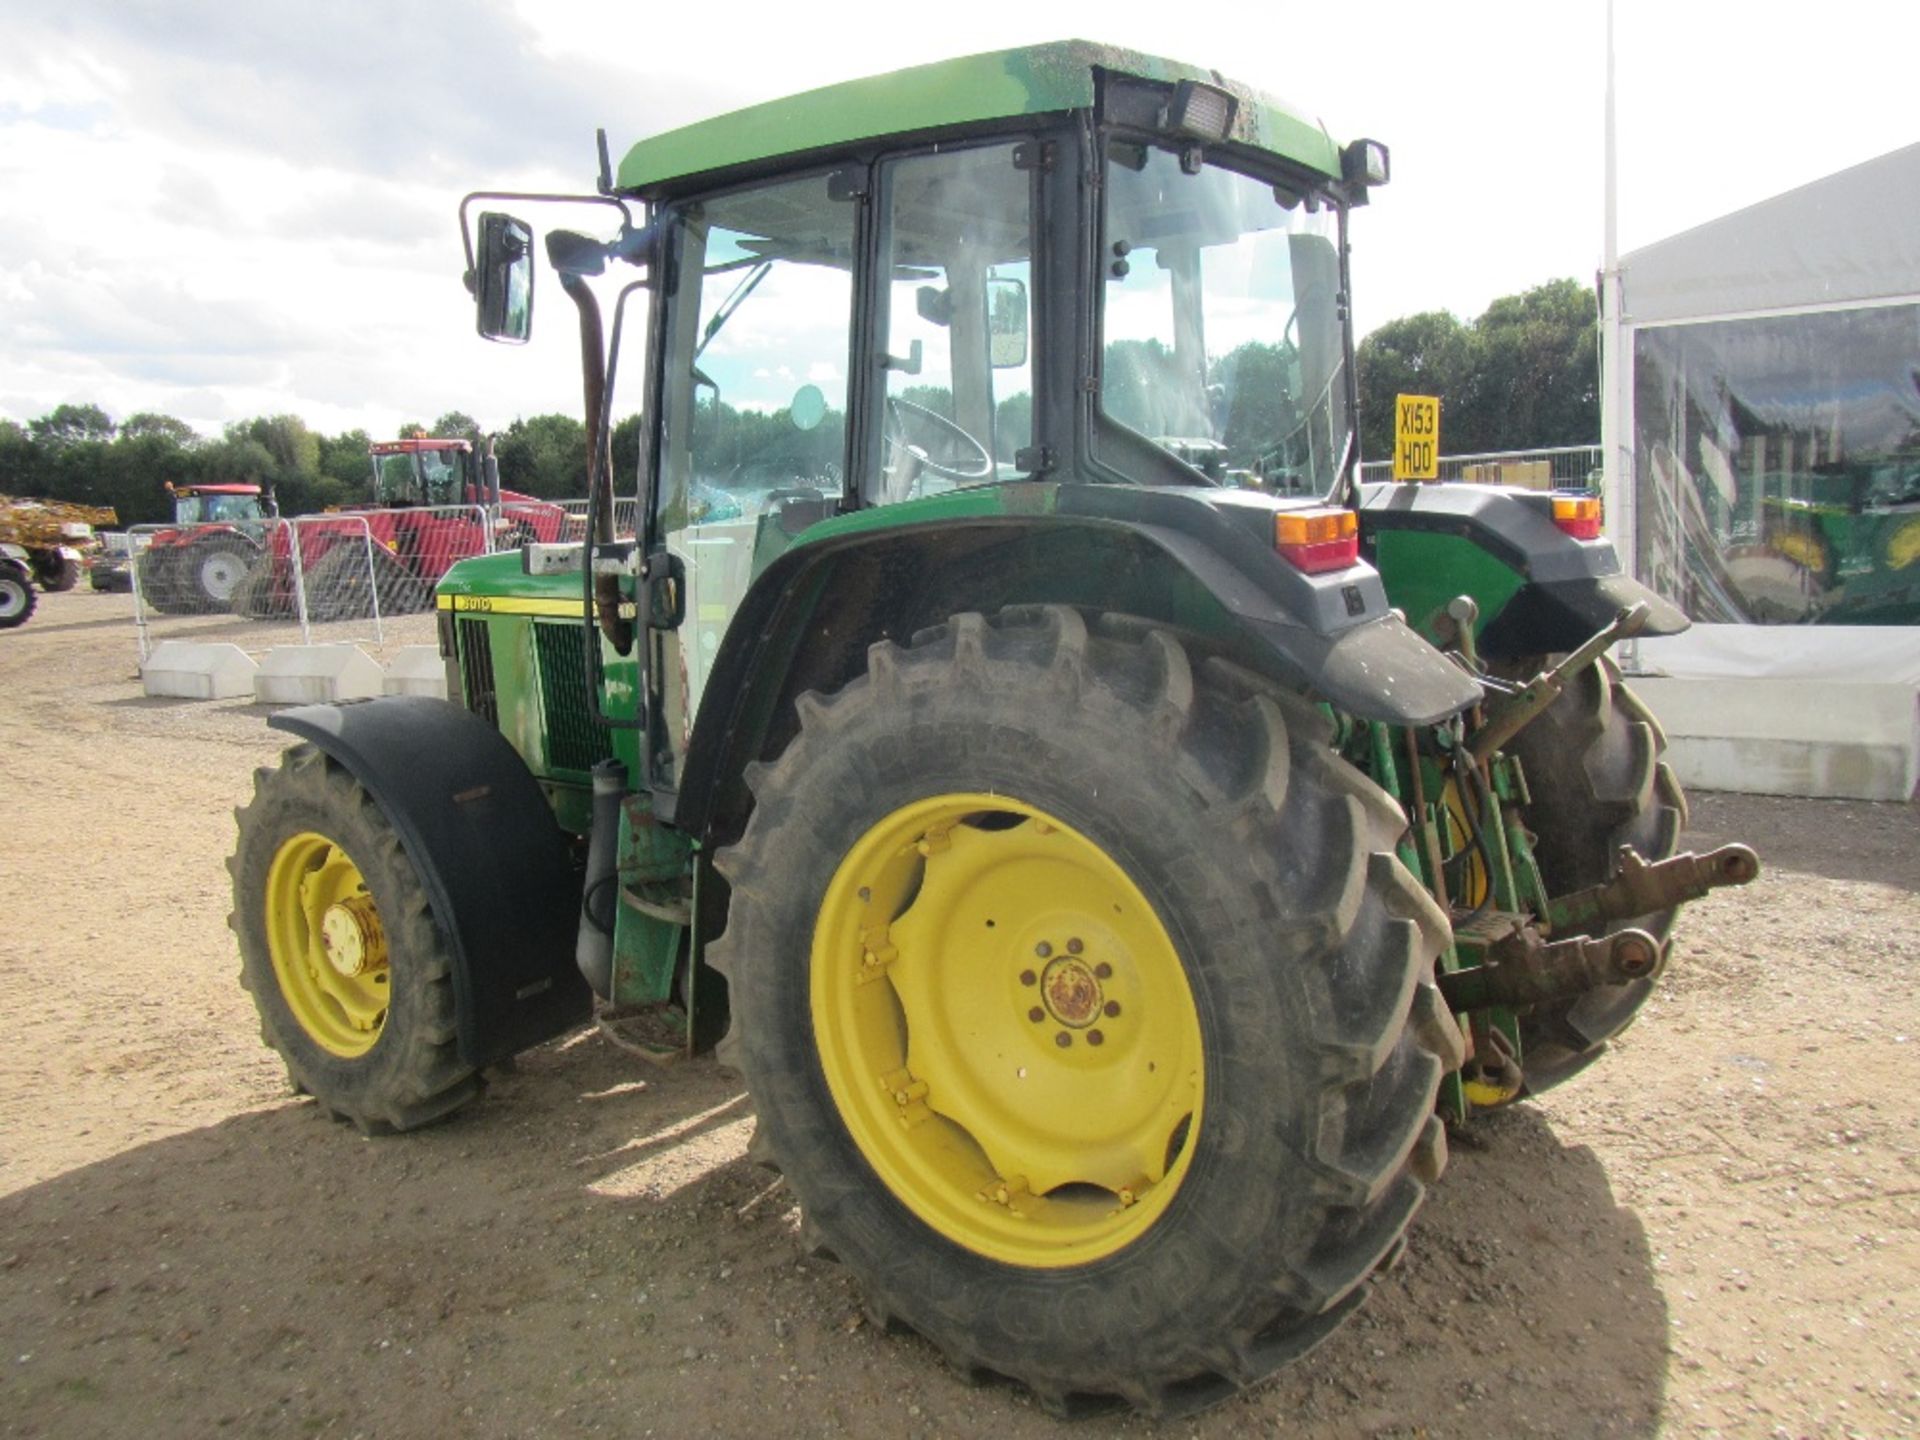 2000 John Deere 6010 4wd Tractor with Air Con & Creeper Gear. From Veg Rig. 4542 hrs. Reg No X153 - Image 9 of 17